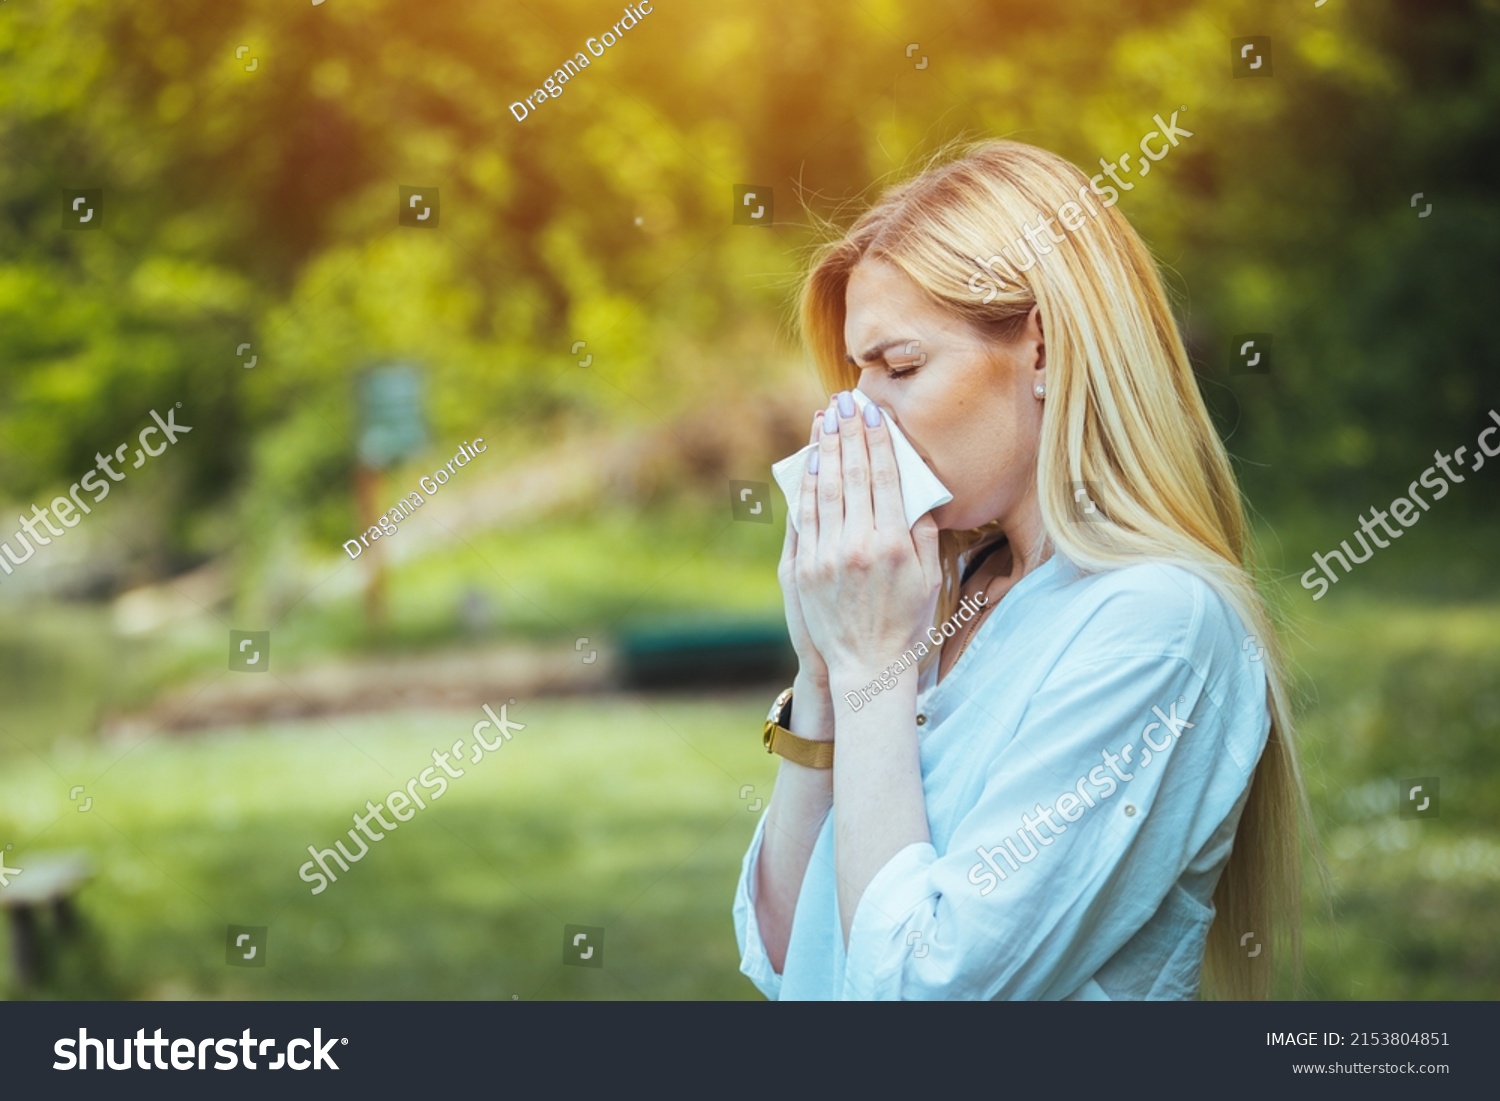 Woman Blowing Her Nose With Handkerchief In Public Parkf. Seasonal Virus Infection. Chronic Disease Control, Allergy Induced Asthma Remedy And Chronic Pulmonary Disease Concept. #2153804851